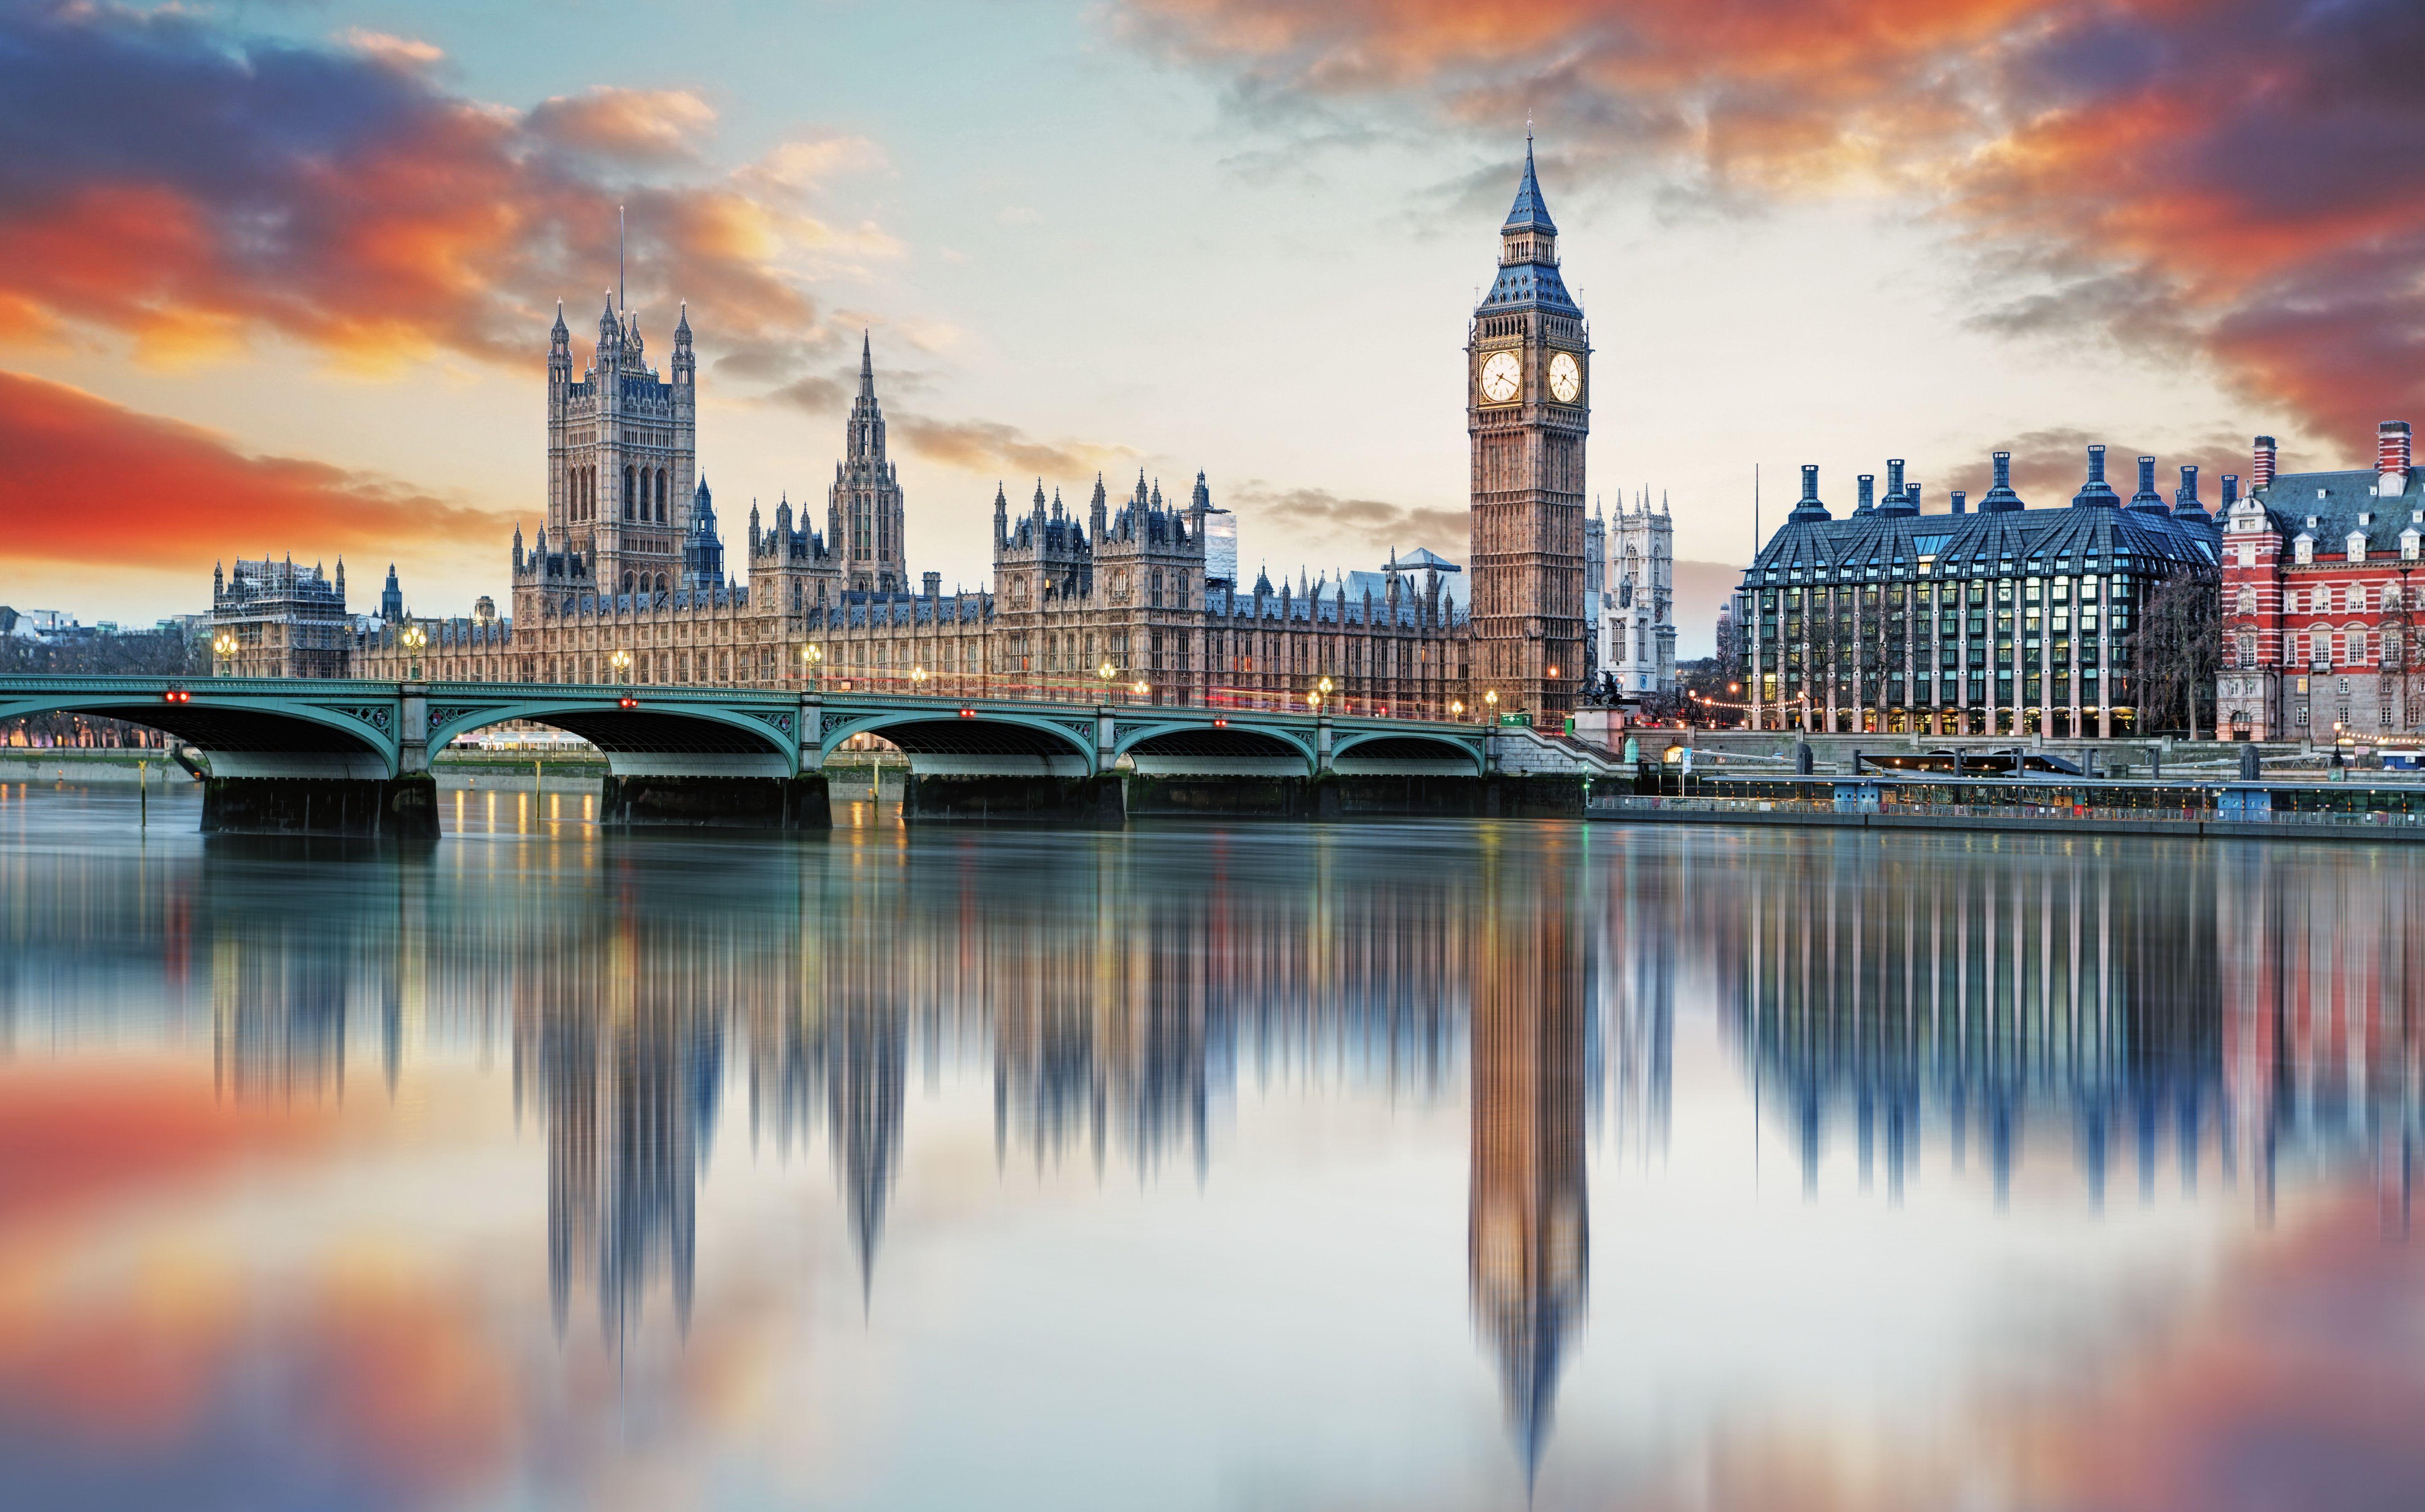 Houses of Parliament 5k Retina Ultra HD Wallpaper. Background Image